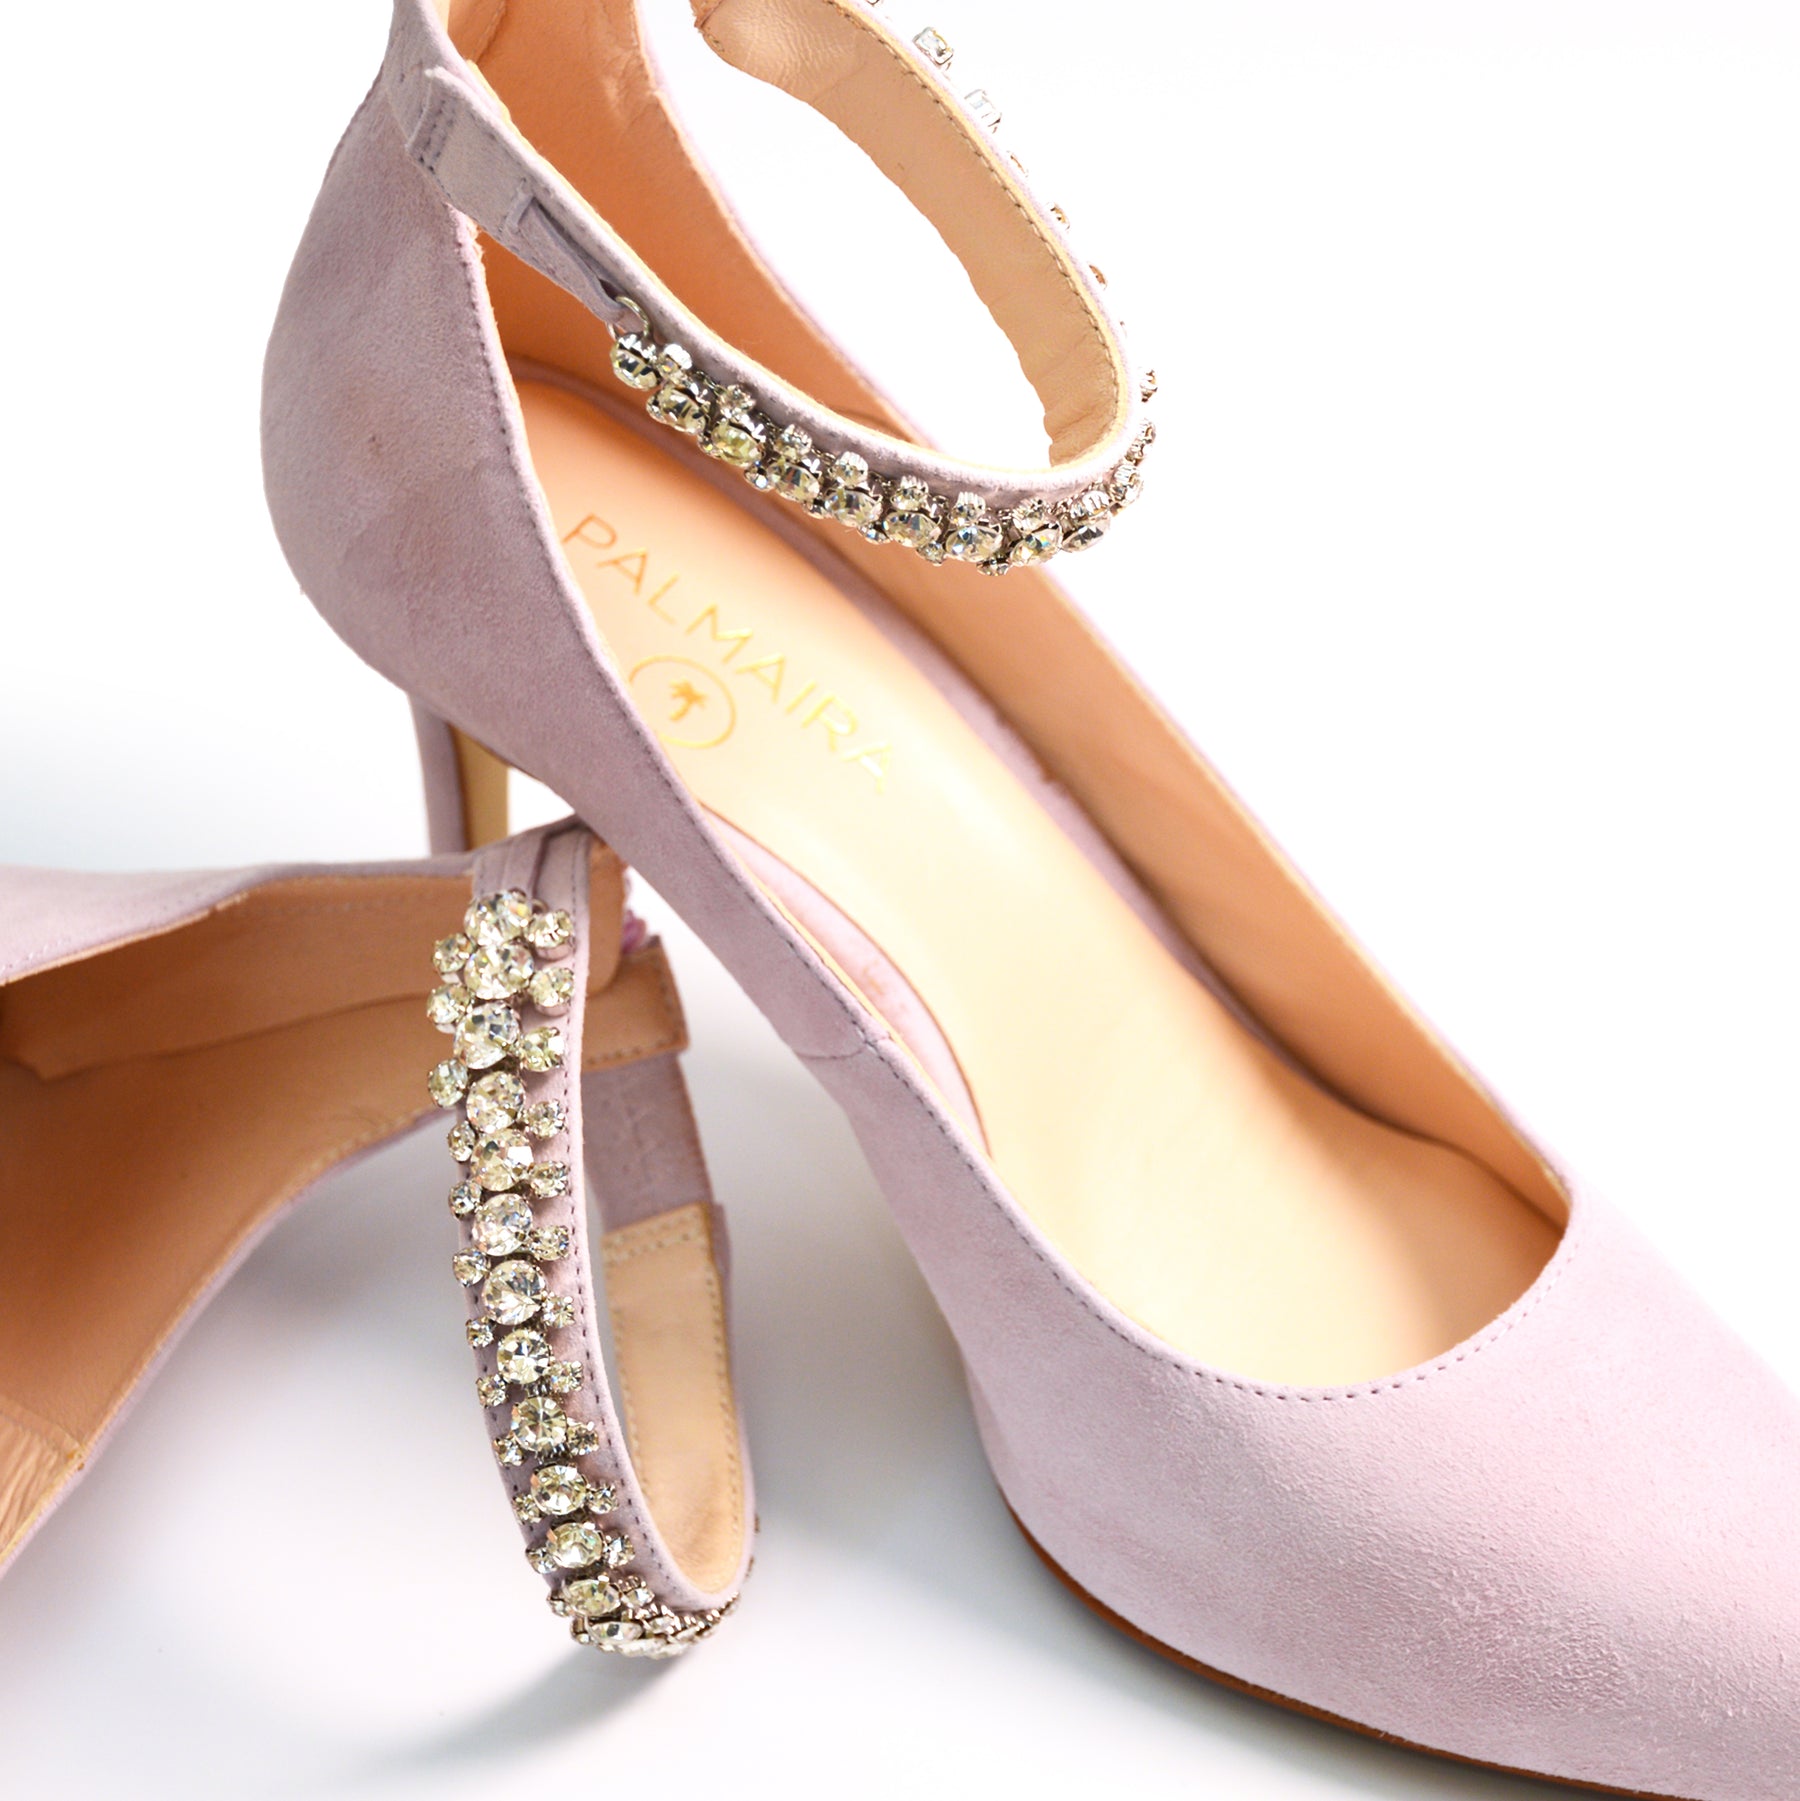 Lilac suede stiletto heels with diamante embellished ankle strap